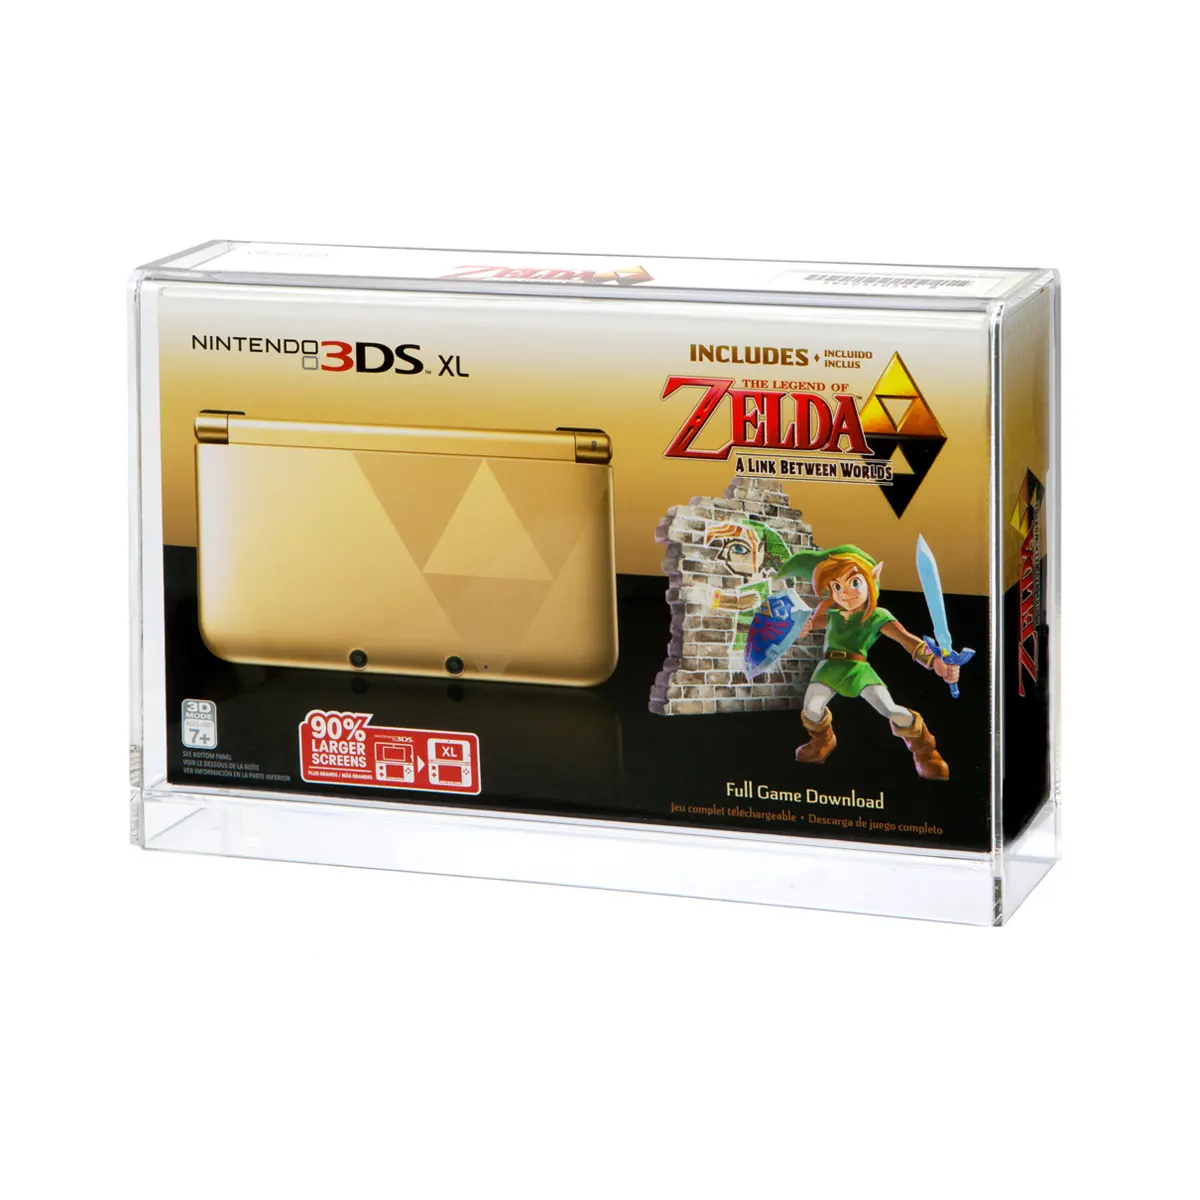 Acrylic Display Case for Nintendo 3DS XL System